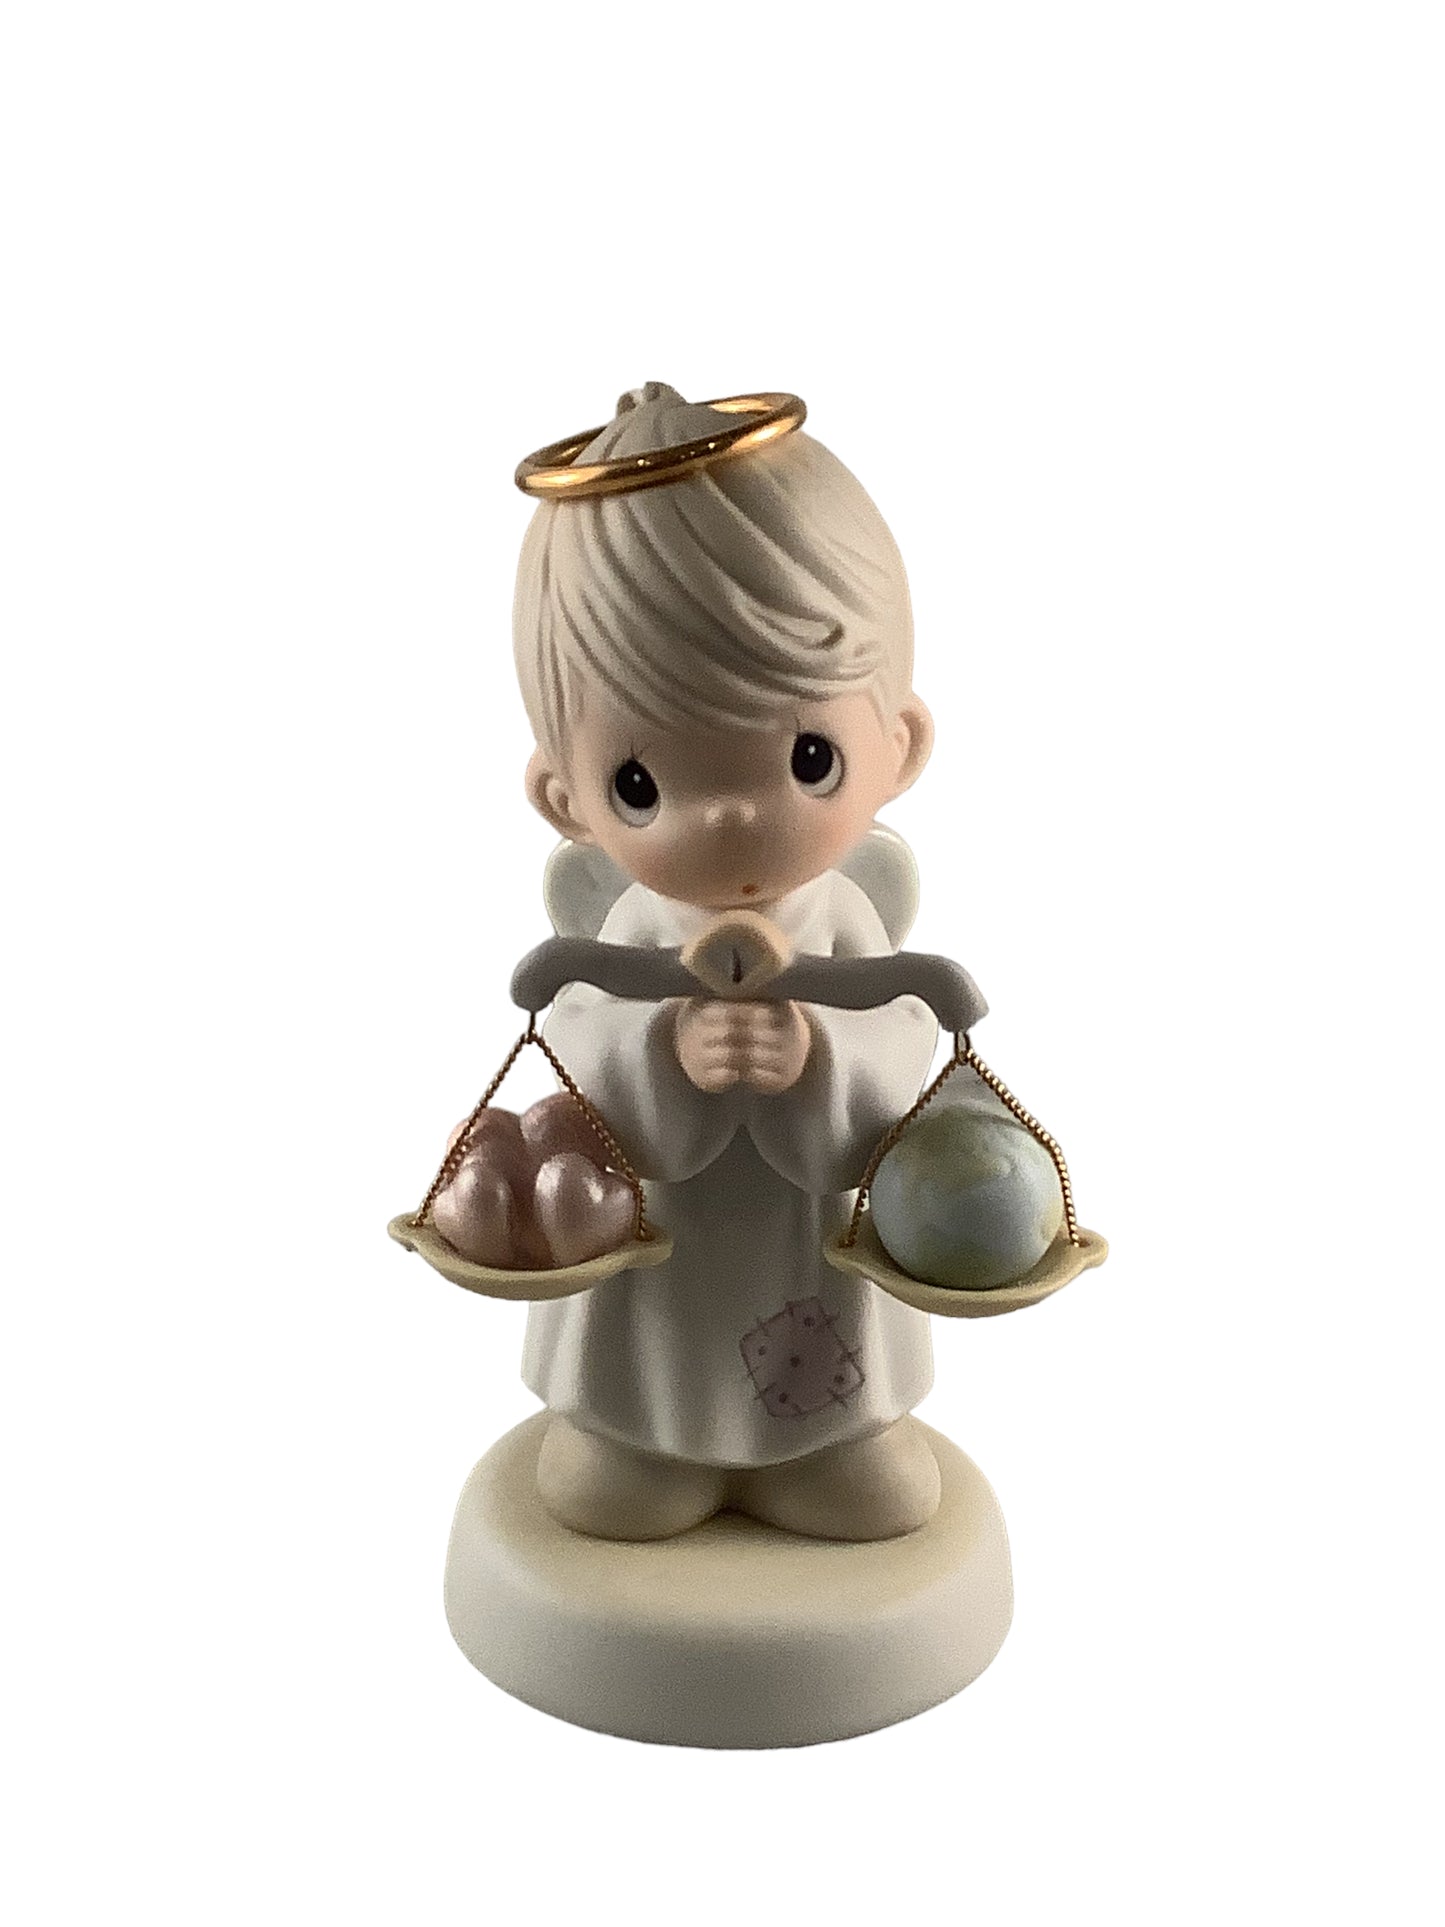 Your Love Means The World To Me - Precious Moment Figurine